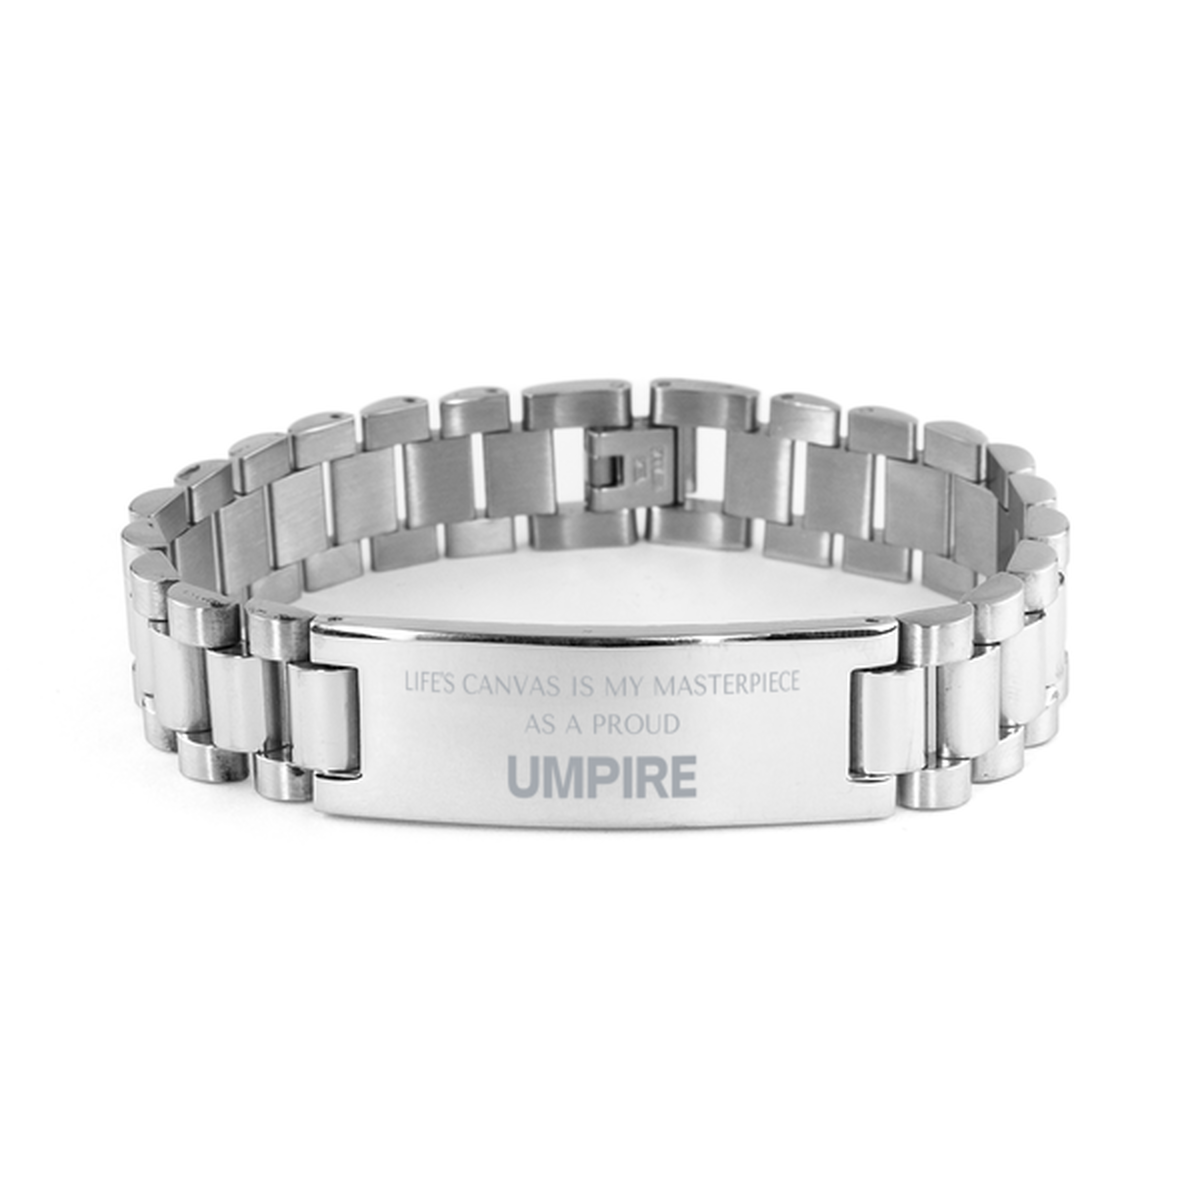 Proud Umpire Gifts, Life's canvas is my masterpiece, Epic Birthday Christmas Unique Ladder Stainless Steel Bracelet For Umpire, Coworkers, Men, Women, Friends